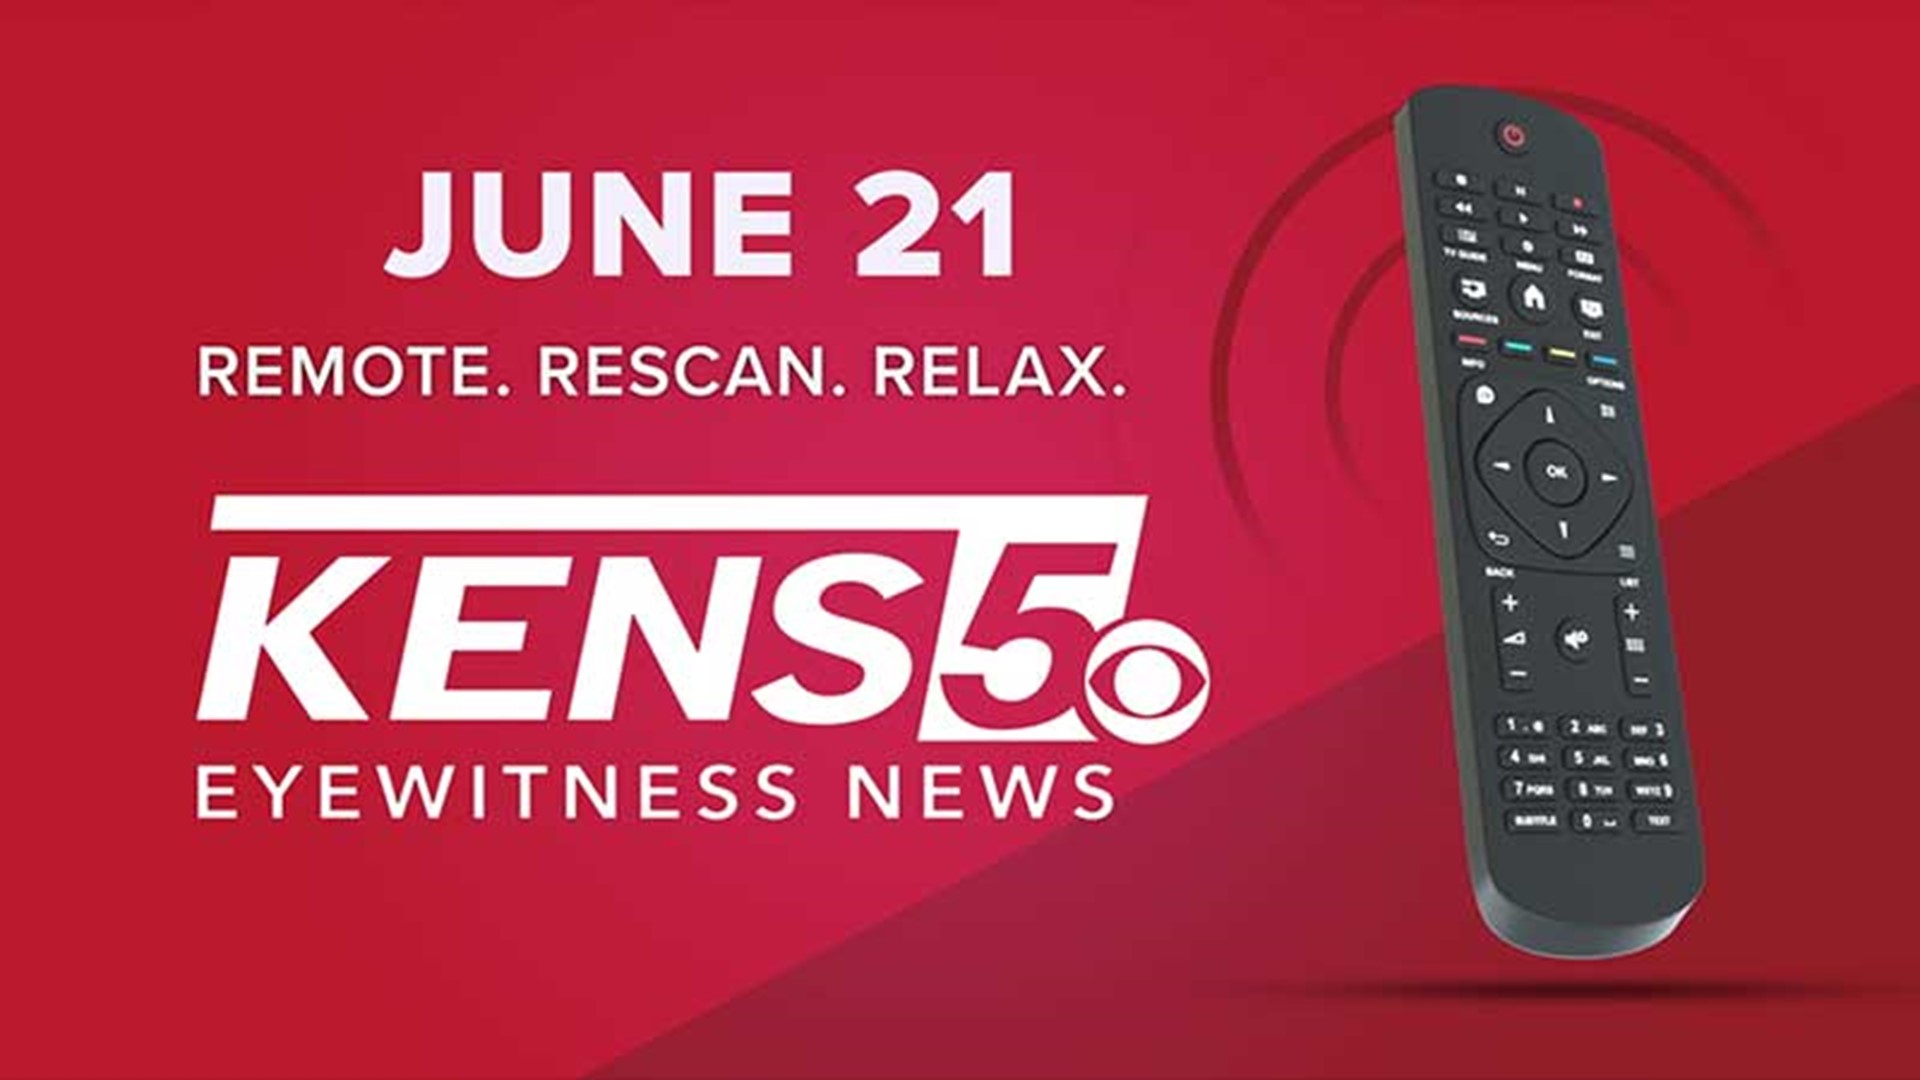 On June 21, KENS 5 will begin broadcasting on a new channel number. You'll need to rescan the channels on your television set to keep watching your favorite KENS 5 shows!